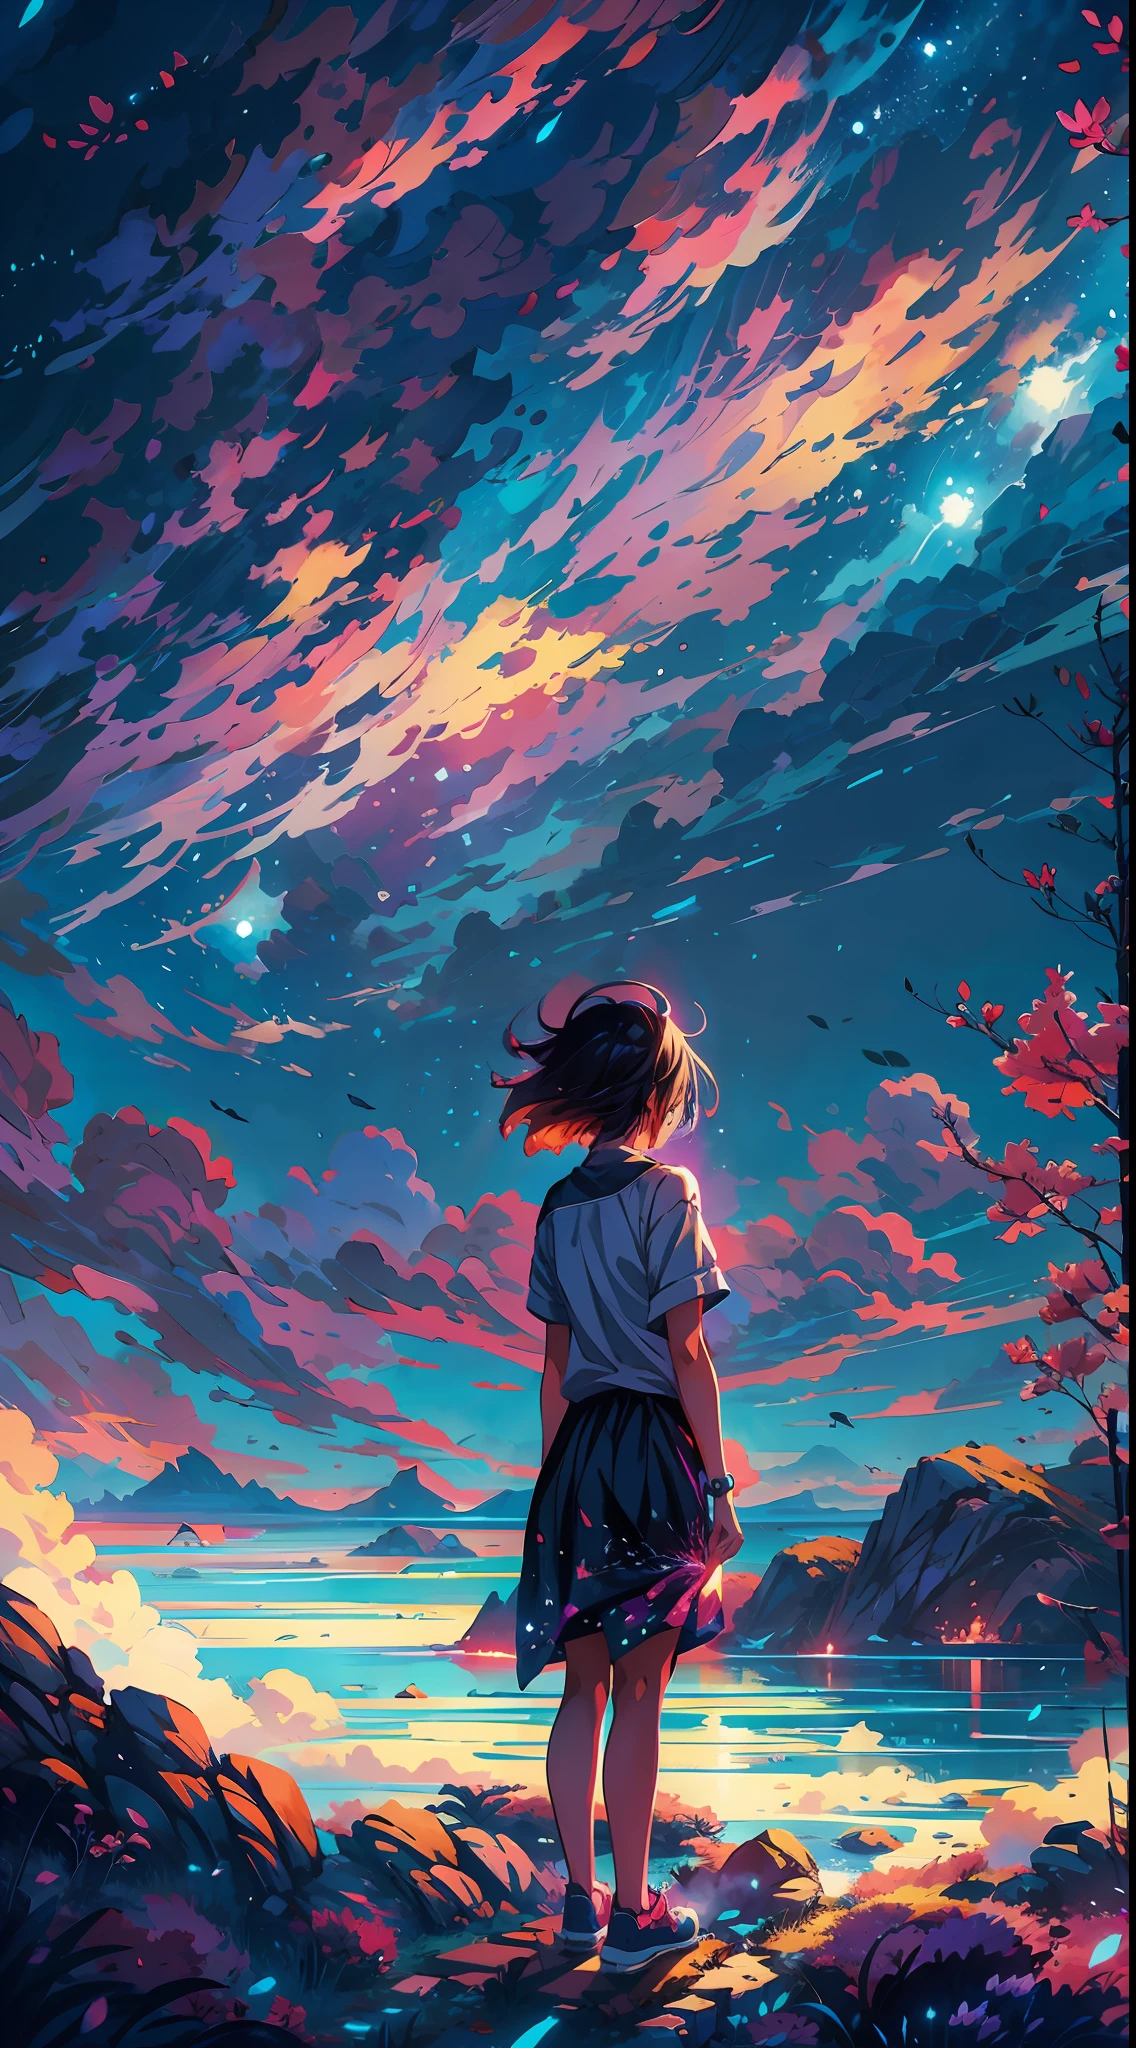 anime girl standing on a rock looking at a star filled sky, makoto shinkai cyril rolando, anime art wallpaper 4k, anime art wallpaper 4 k, anime art wallpaper 8 k, cosmic skies. by makoto shinkai, inspired by Cyril Rolando, in the style dan mumford artwork, amazing wallpaper, by Yuumei